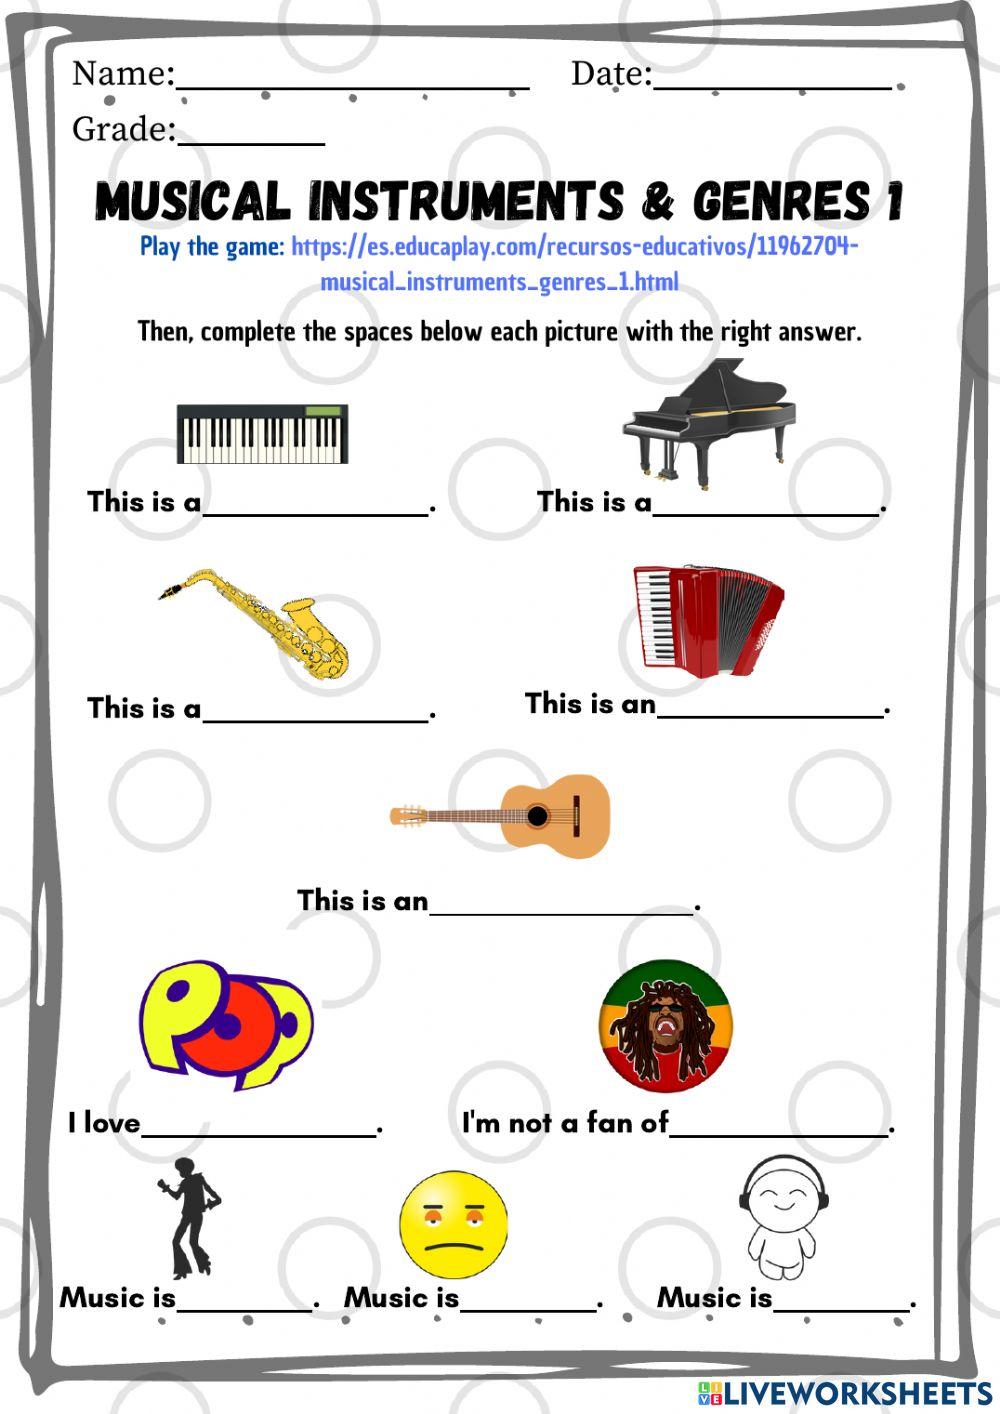 (Cycle 1 Session 3 Annex 3) - Musical instruments & genres 1